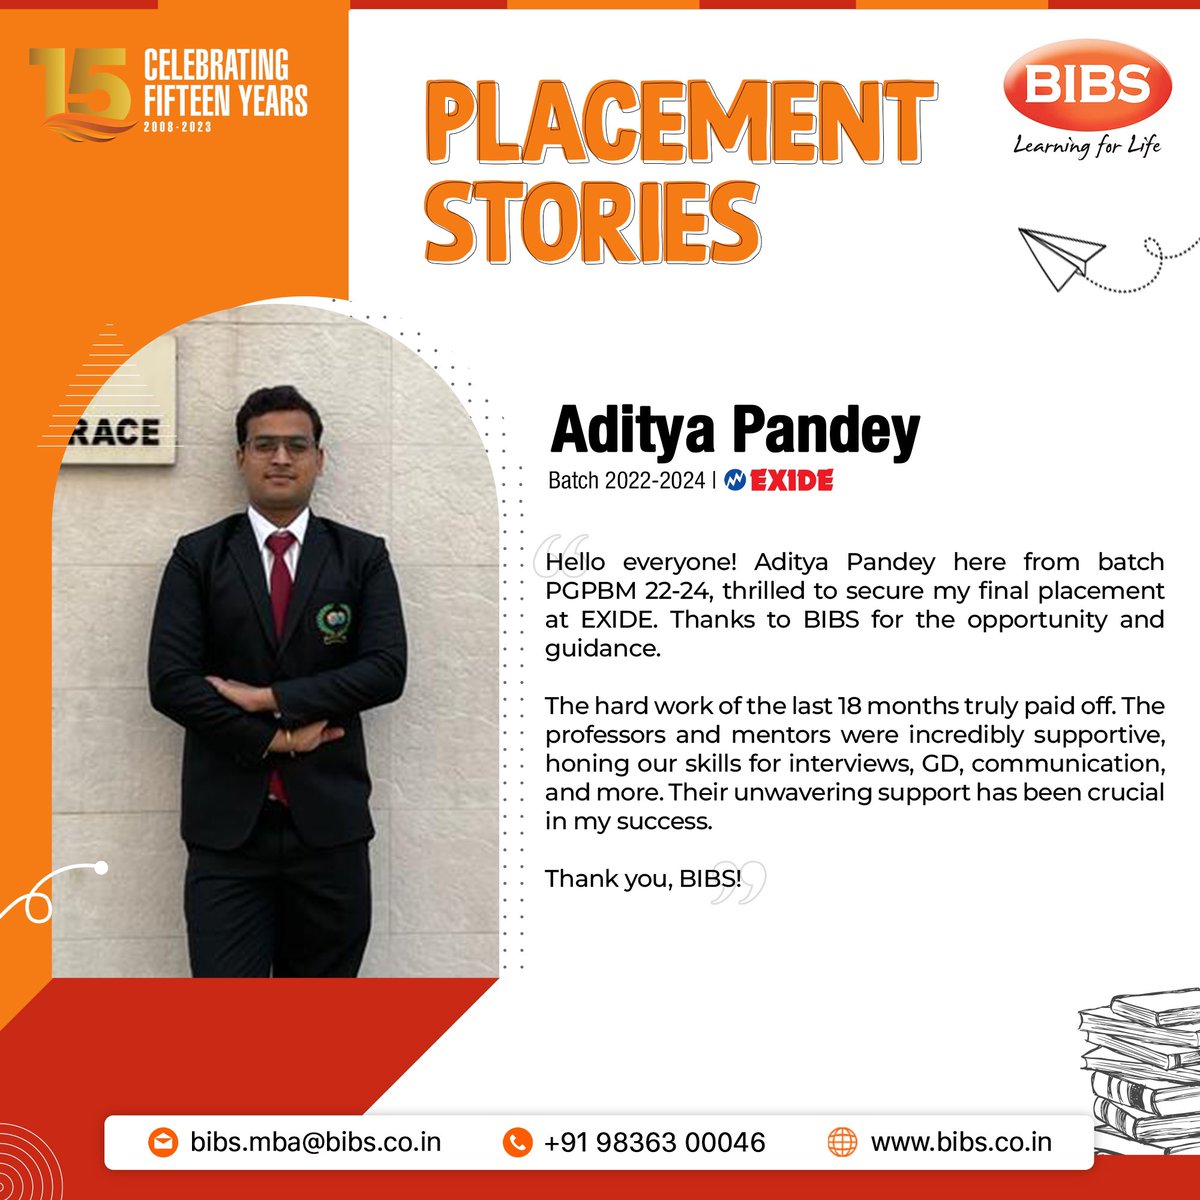 BIBS presents the placement success stories of our students. We congratulate them for their success and hardships. 

#successstories #bibs #bibsmba #bibseducation #learning #education #placement #placementstoriea #exide #studentstories #placementsuccess #recent